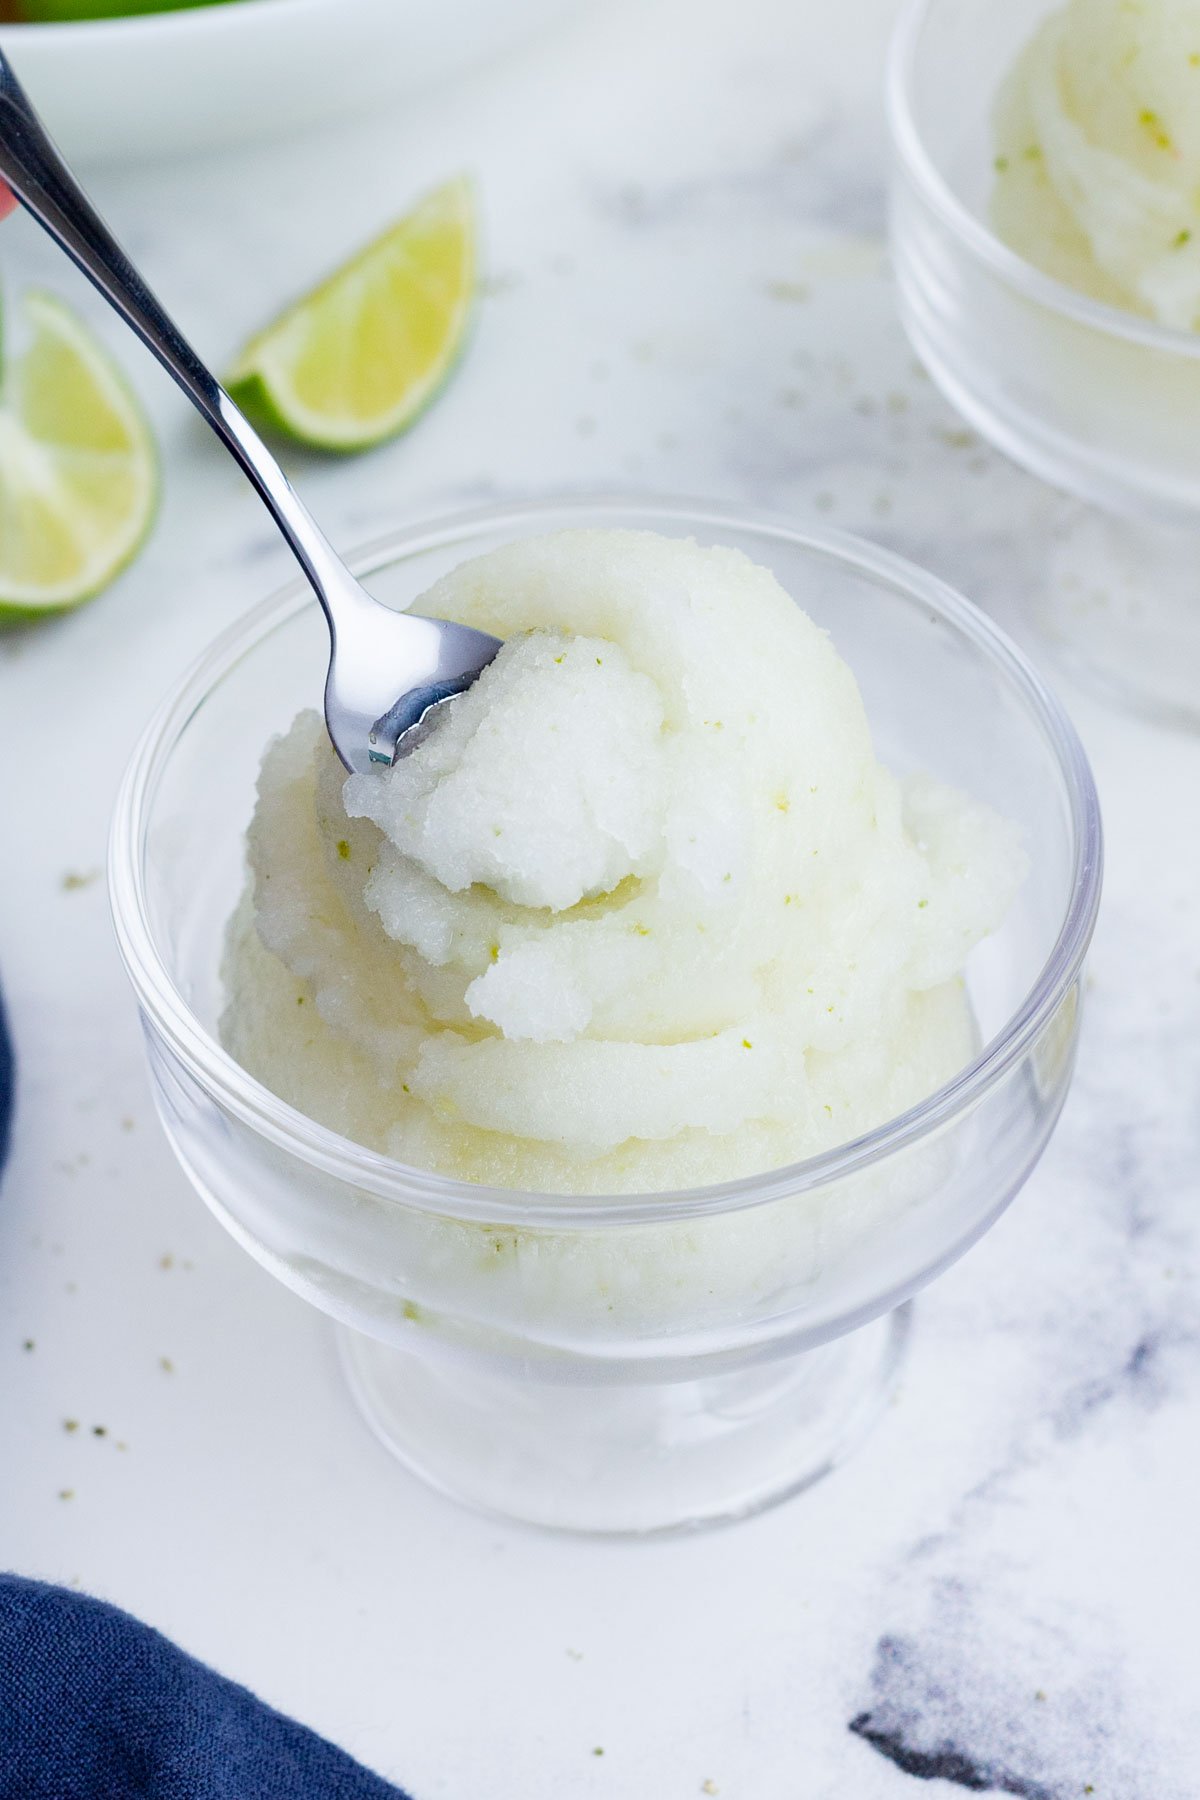 Lime sorbet is served in a glass cup.